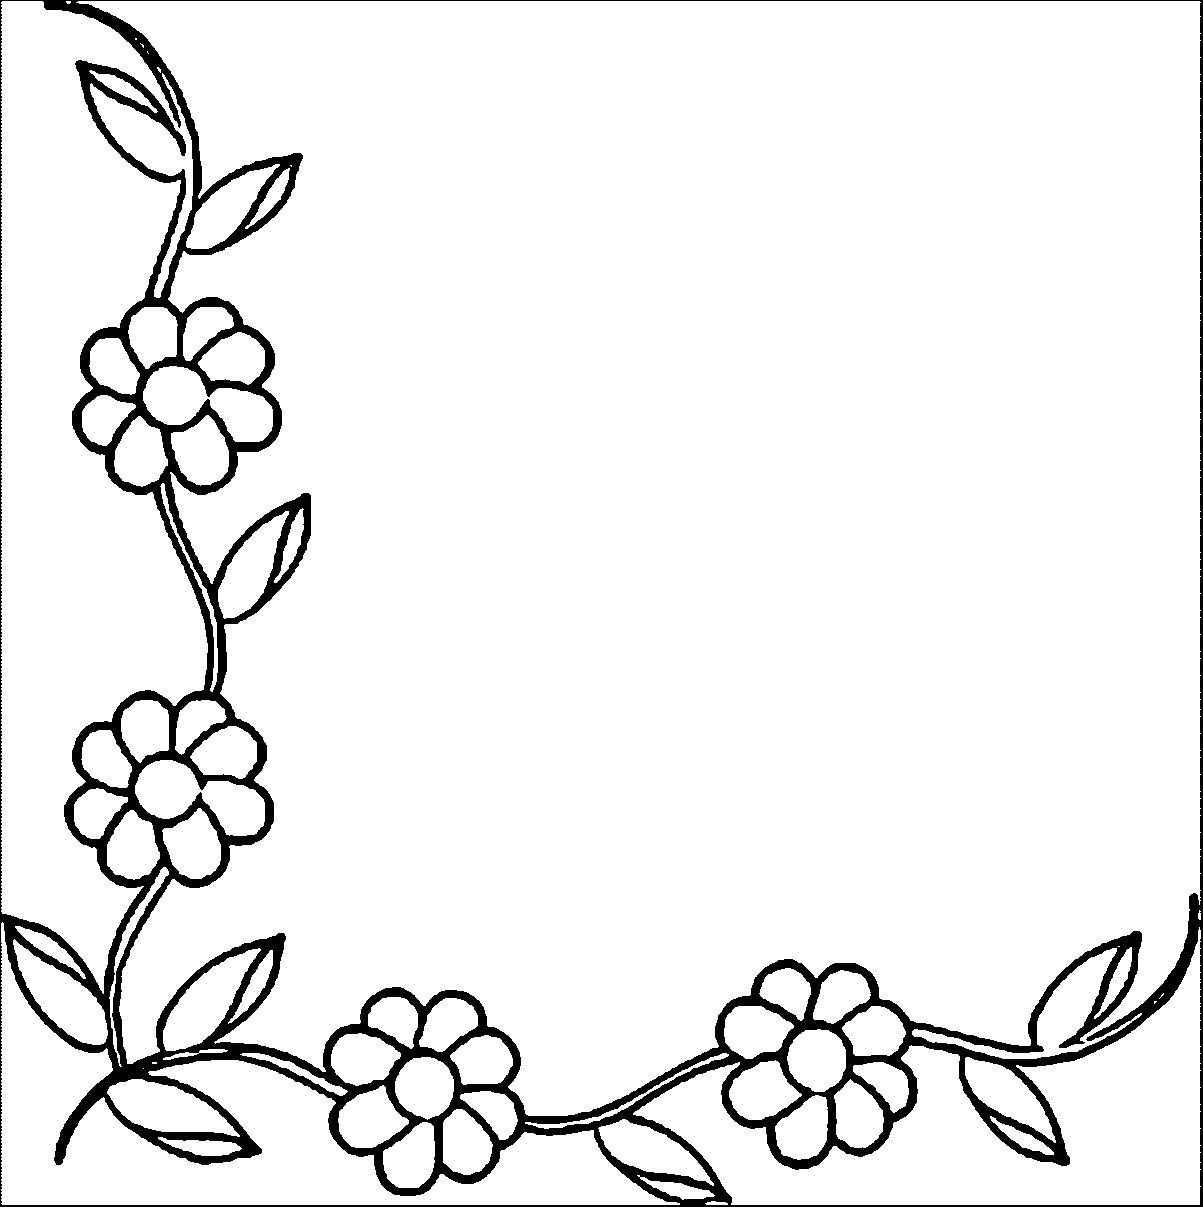 Coloring Borders Clipart Best